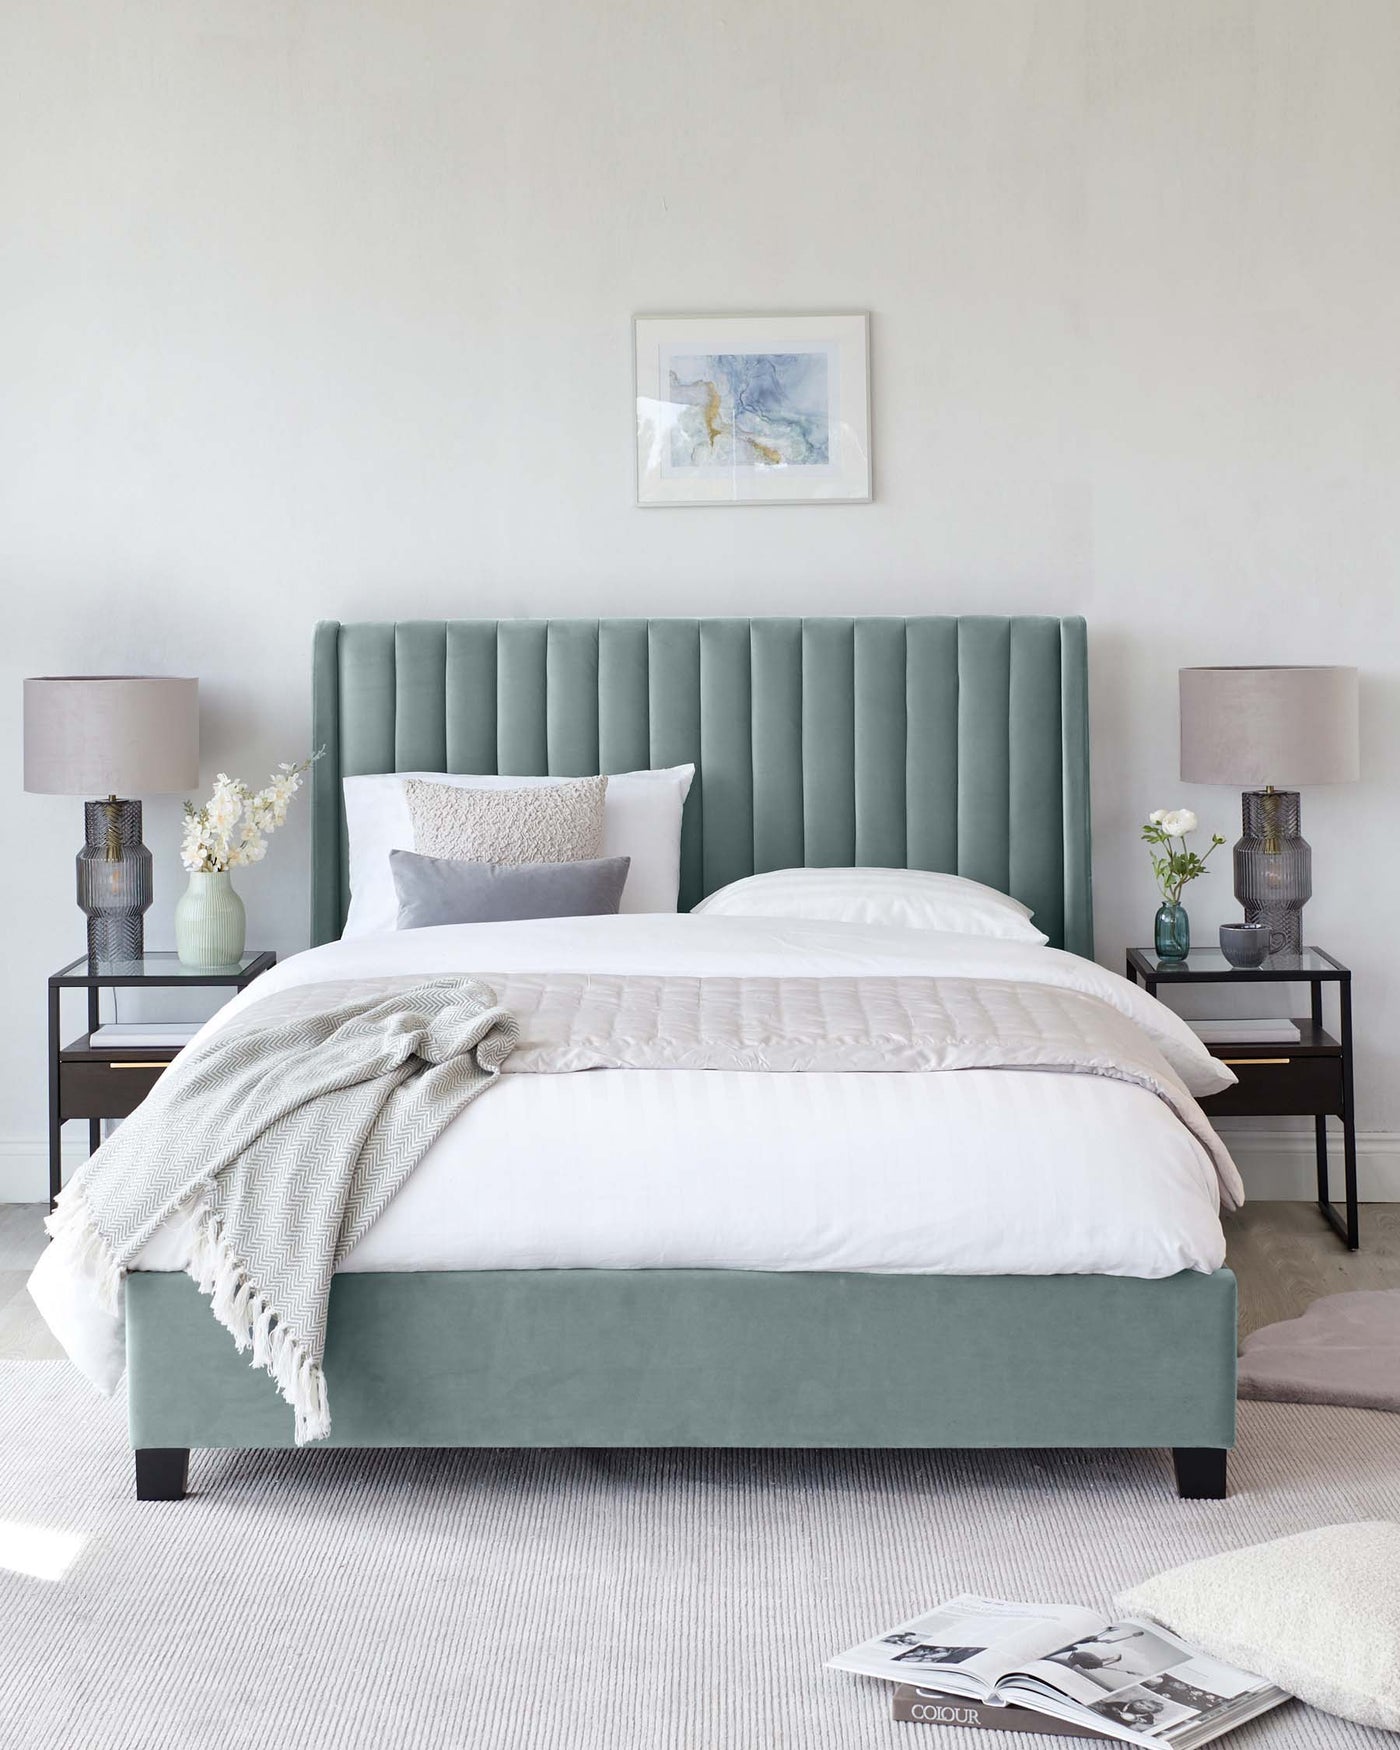 Elegant bedroom setup featuring an upholstered king-size bed with a tall, tufted headboard in a soothing green hue. Two matching nightstands with a modern, minimal design flank the bed, each bearing a stylish table lamp with a textured base and white shade. The bed is dressed in crisp white linens, accented by a textured throw and decorative pillows. A simple framed artwork hangs above the headboard, and the room is softened by a neutral area rug underfoot.